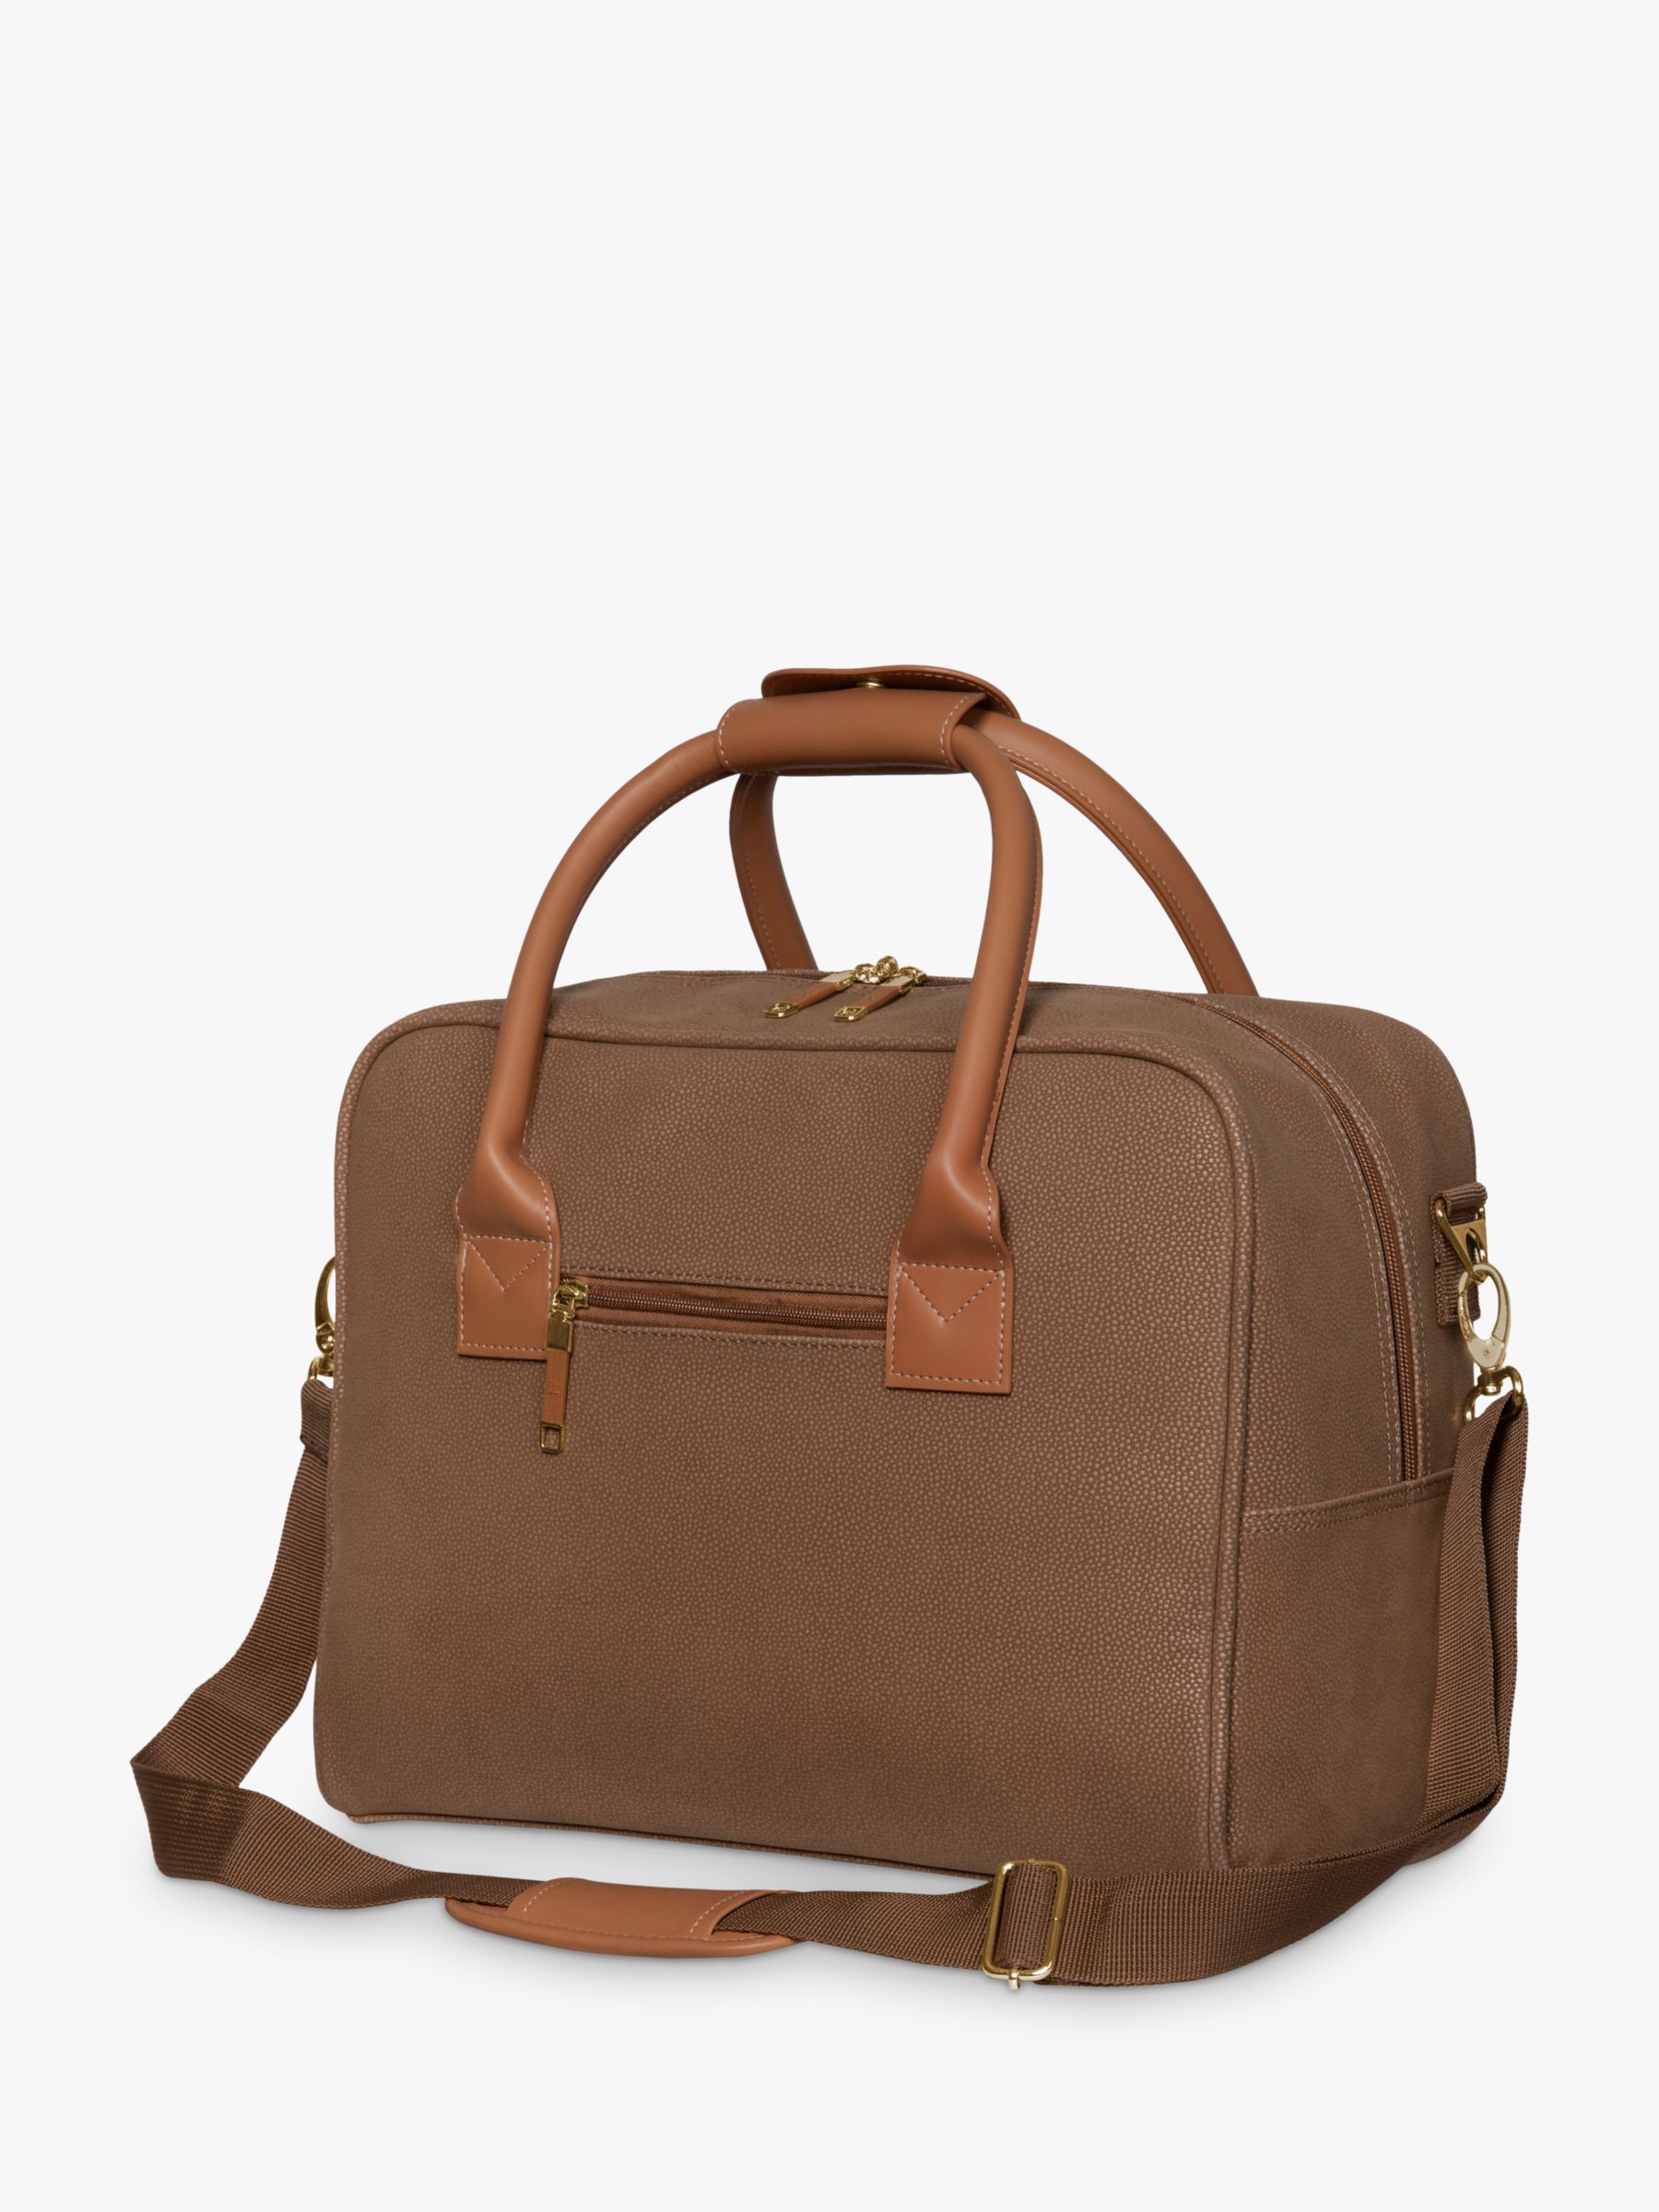 Buy it luggage Enduring Small Holdall Bag Online at johnlewis.com